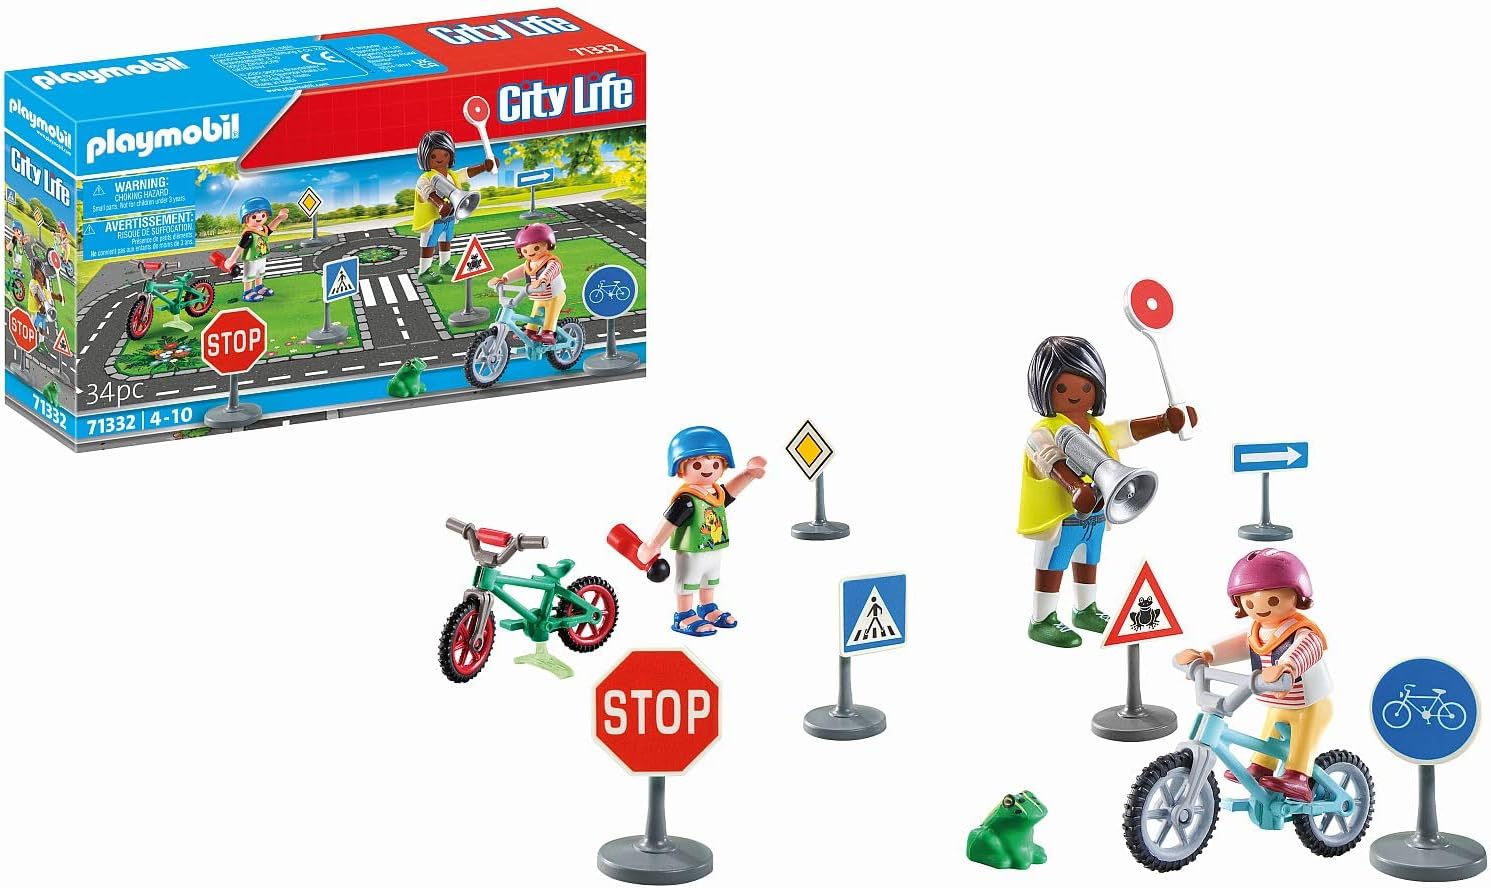 PLAYMOBIL City Life 71332 Bicycle Course, Traffic Education, Bicycles Road Signs and More, Toy for Children from 4 Years